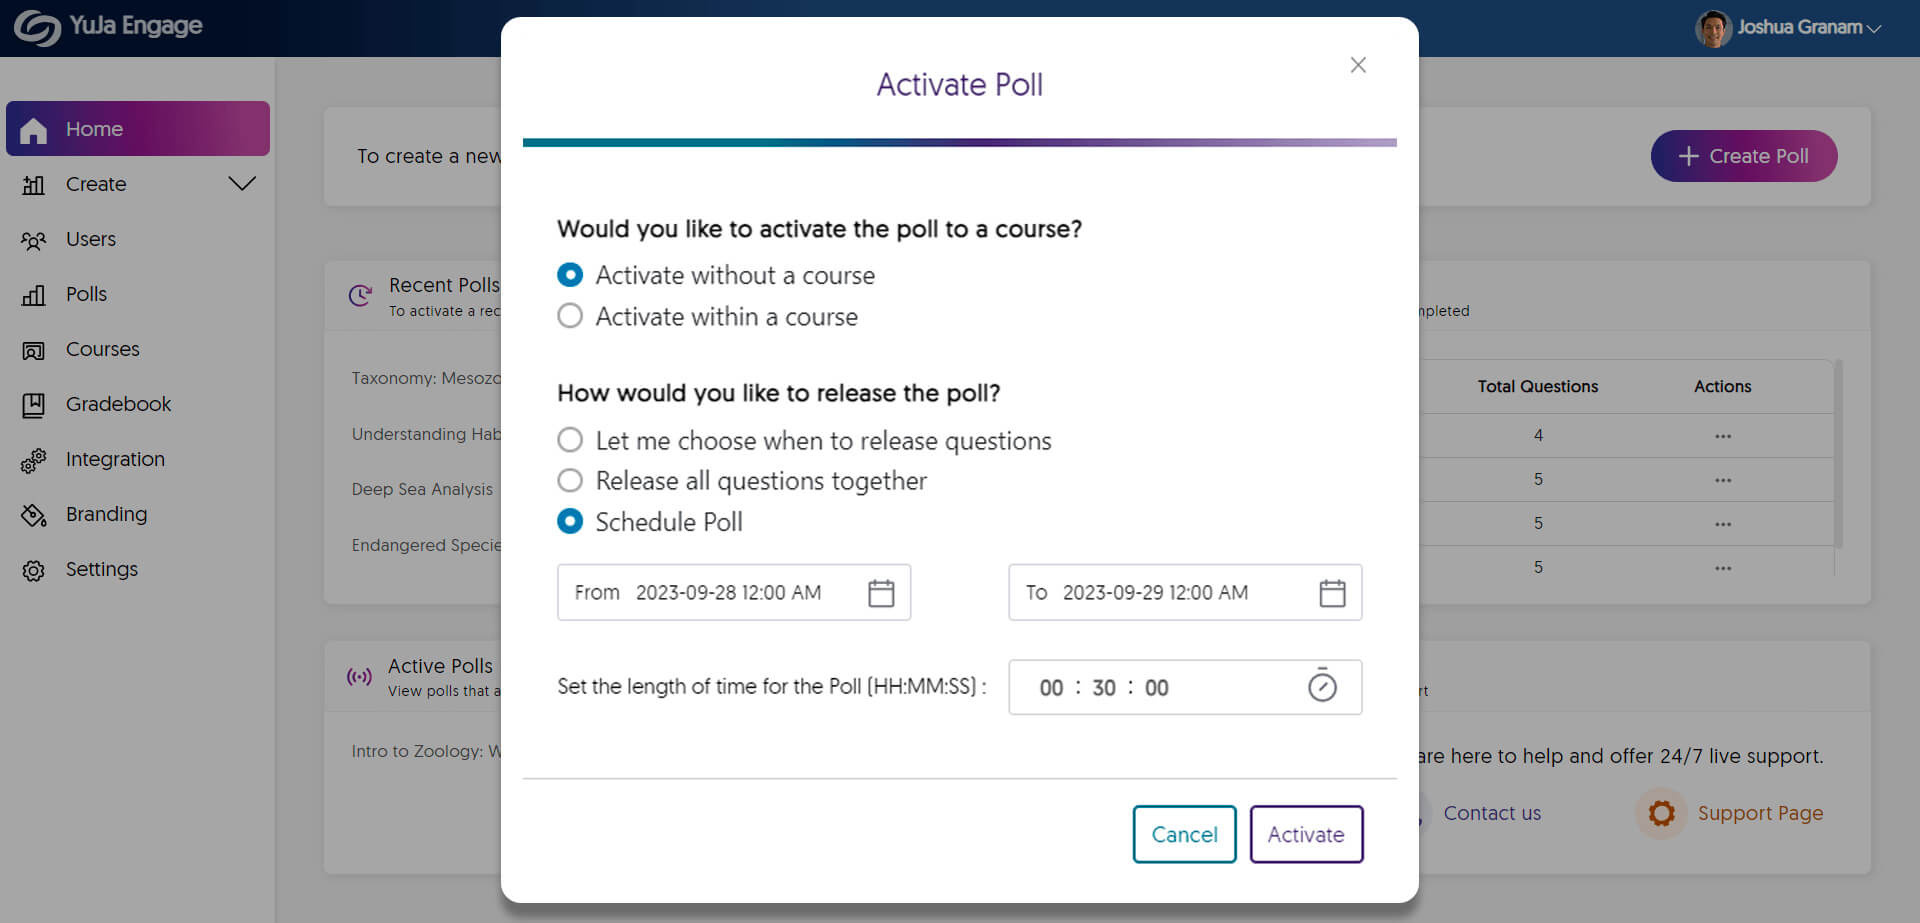 A screenshot showing the poll activation page in YuJa Engage.